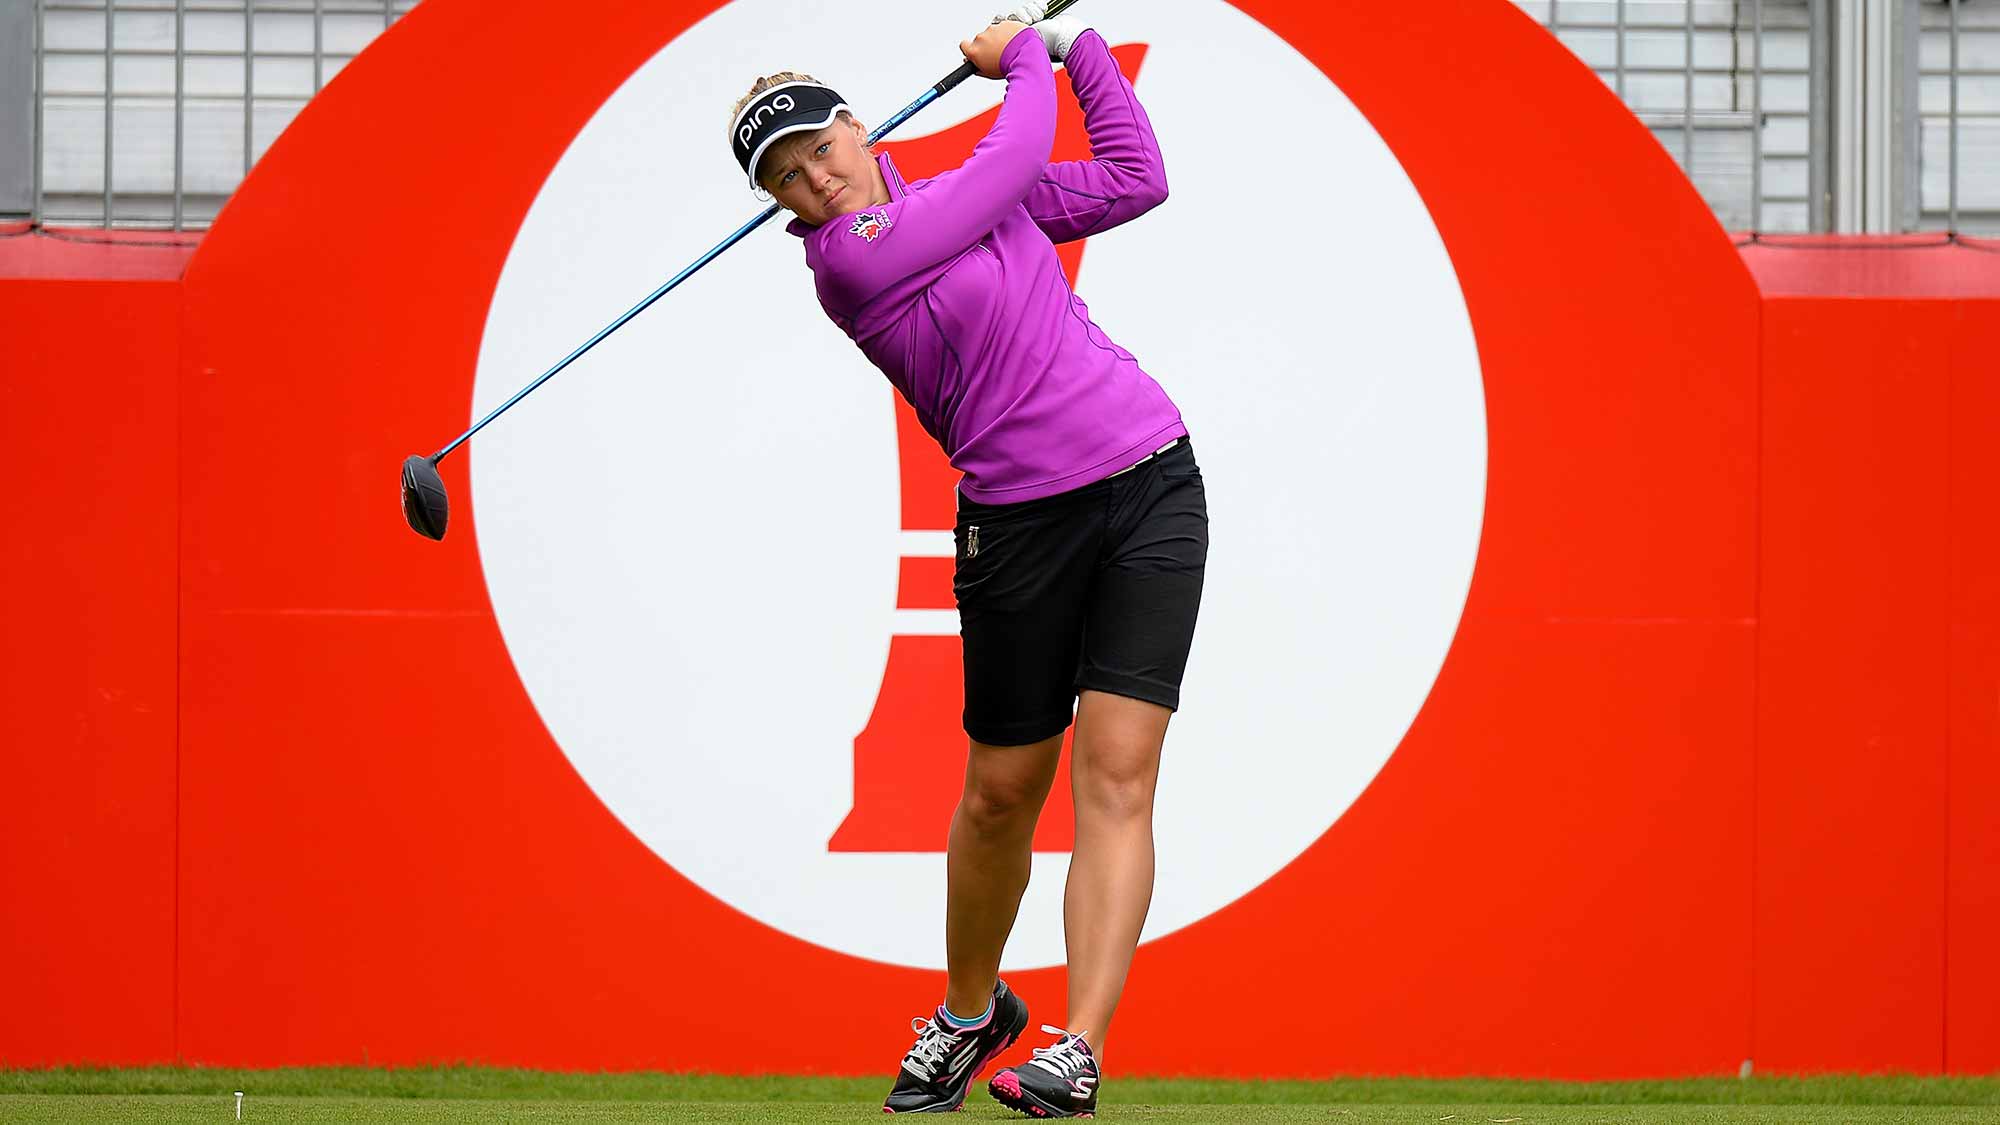 Brooke Henderson of Canada tees off during a Pro-Am round ahead of the Ricoh Women's British Open 